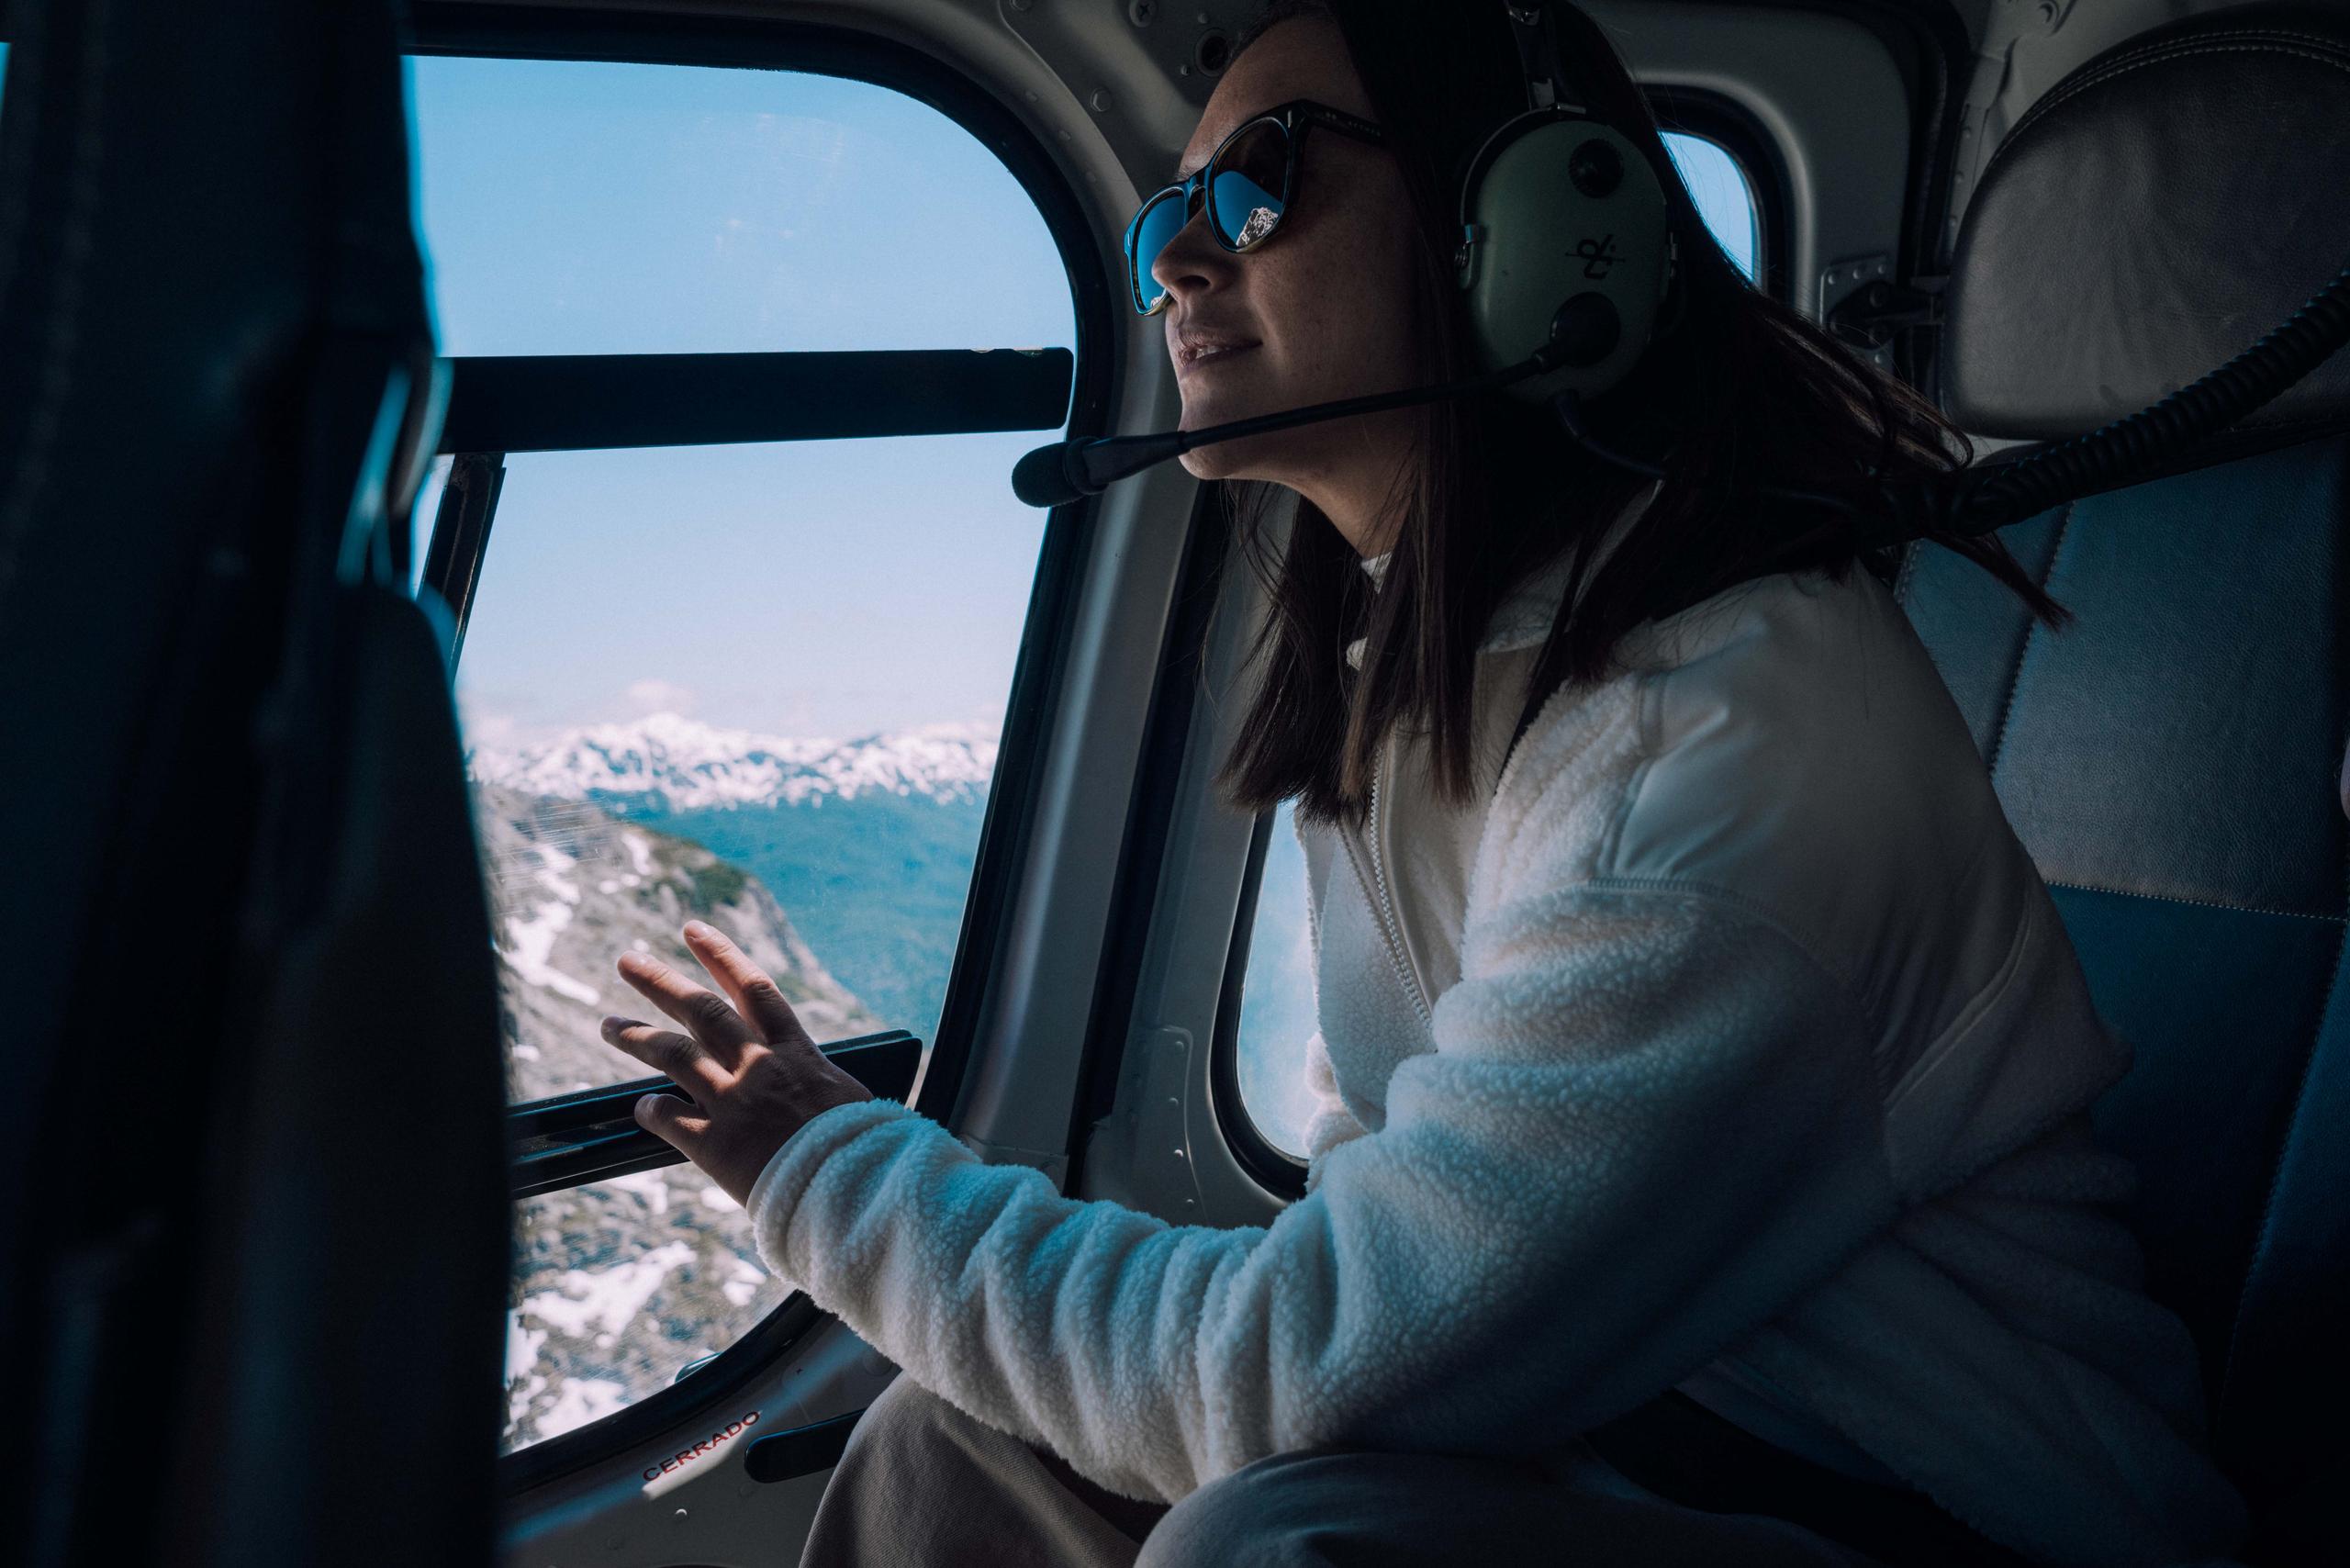 Woman in Terrain Fleece Anorak in helicopter looking out the window overlooking Patagonia, Chile